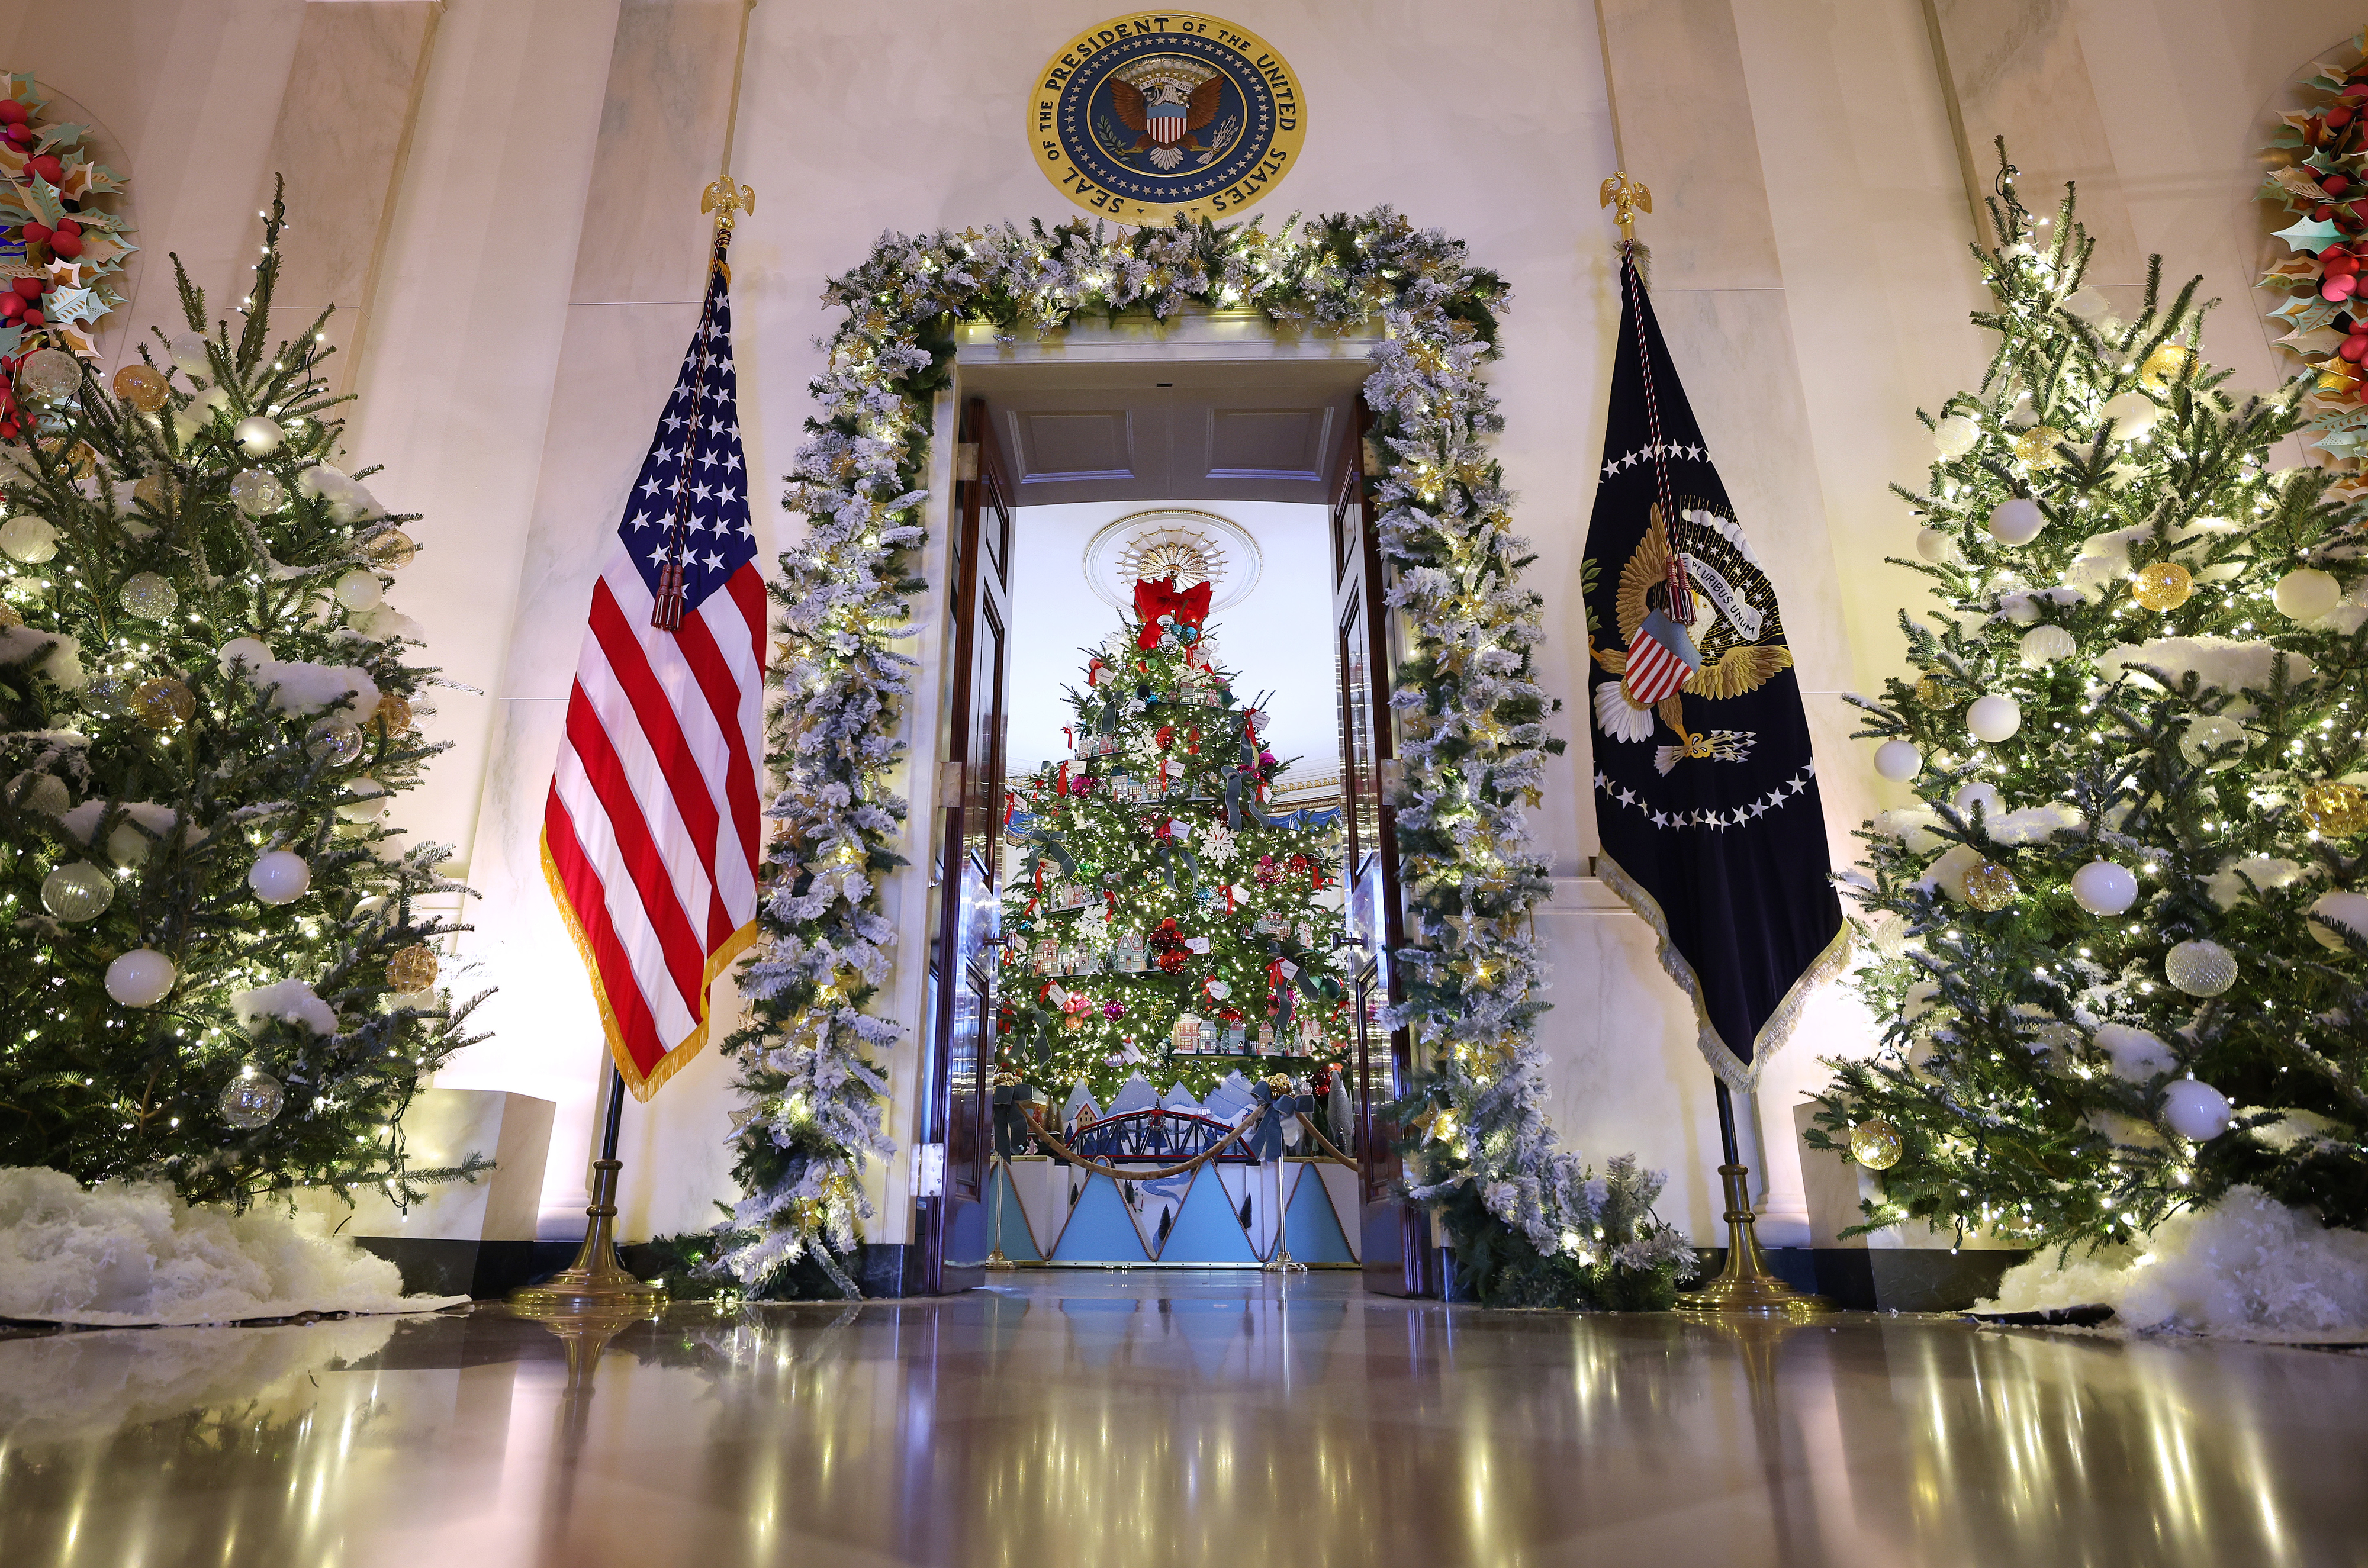 Christmas display in the White House